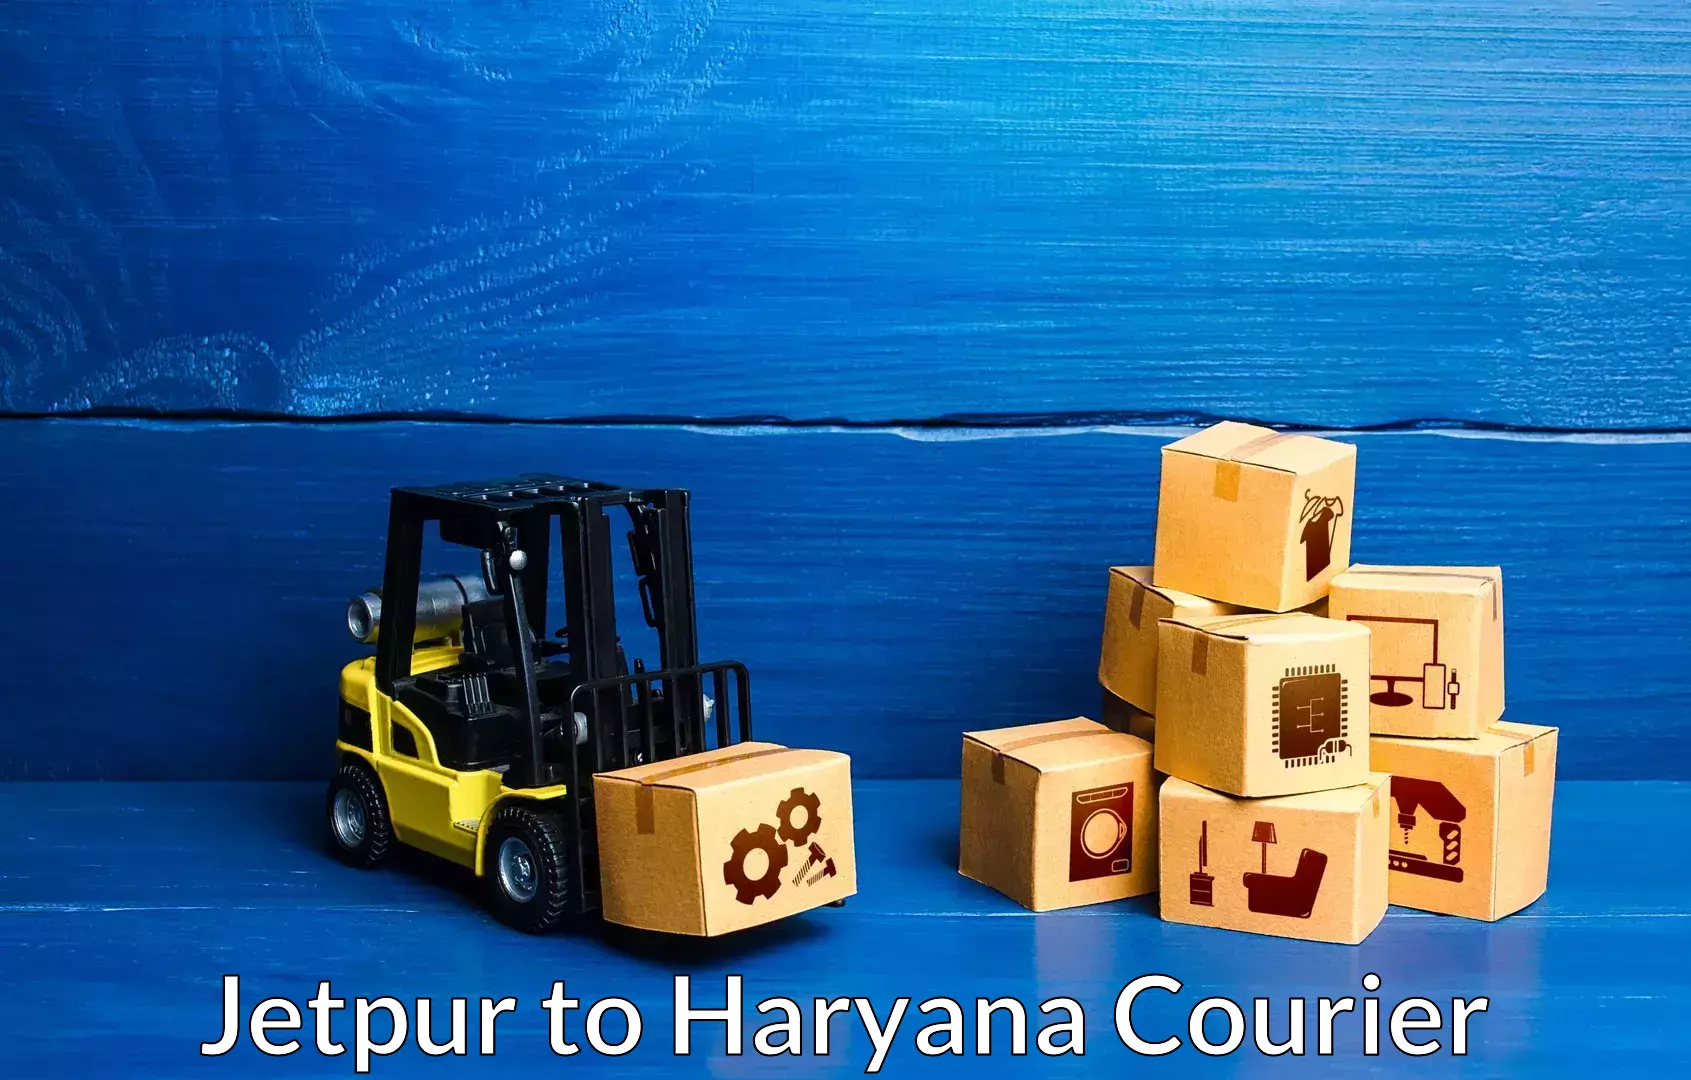 Cost-effective moving options Jetpur to Gurgaon